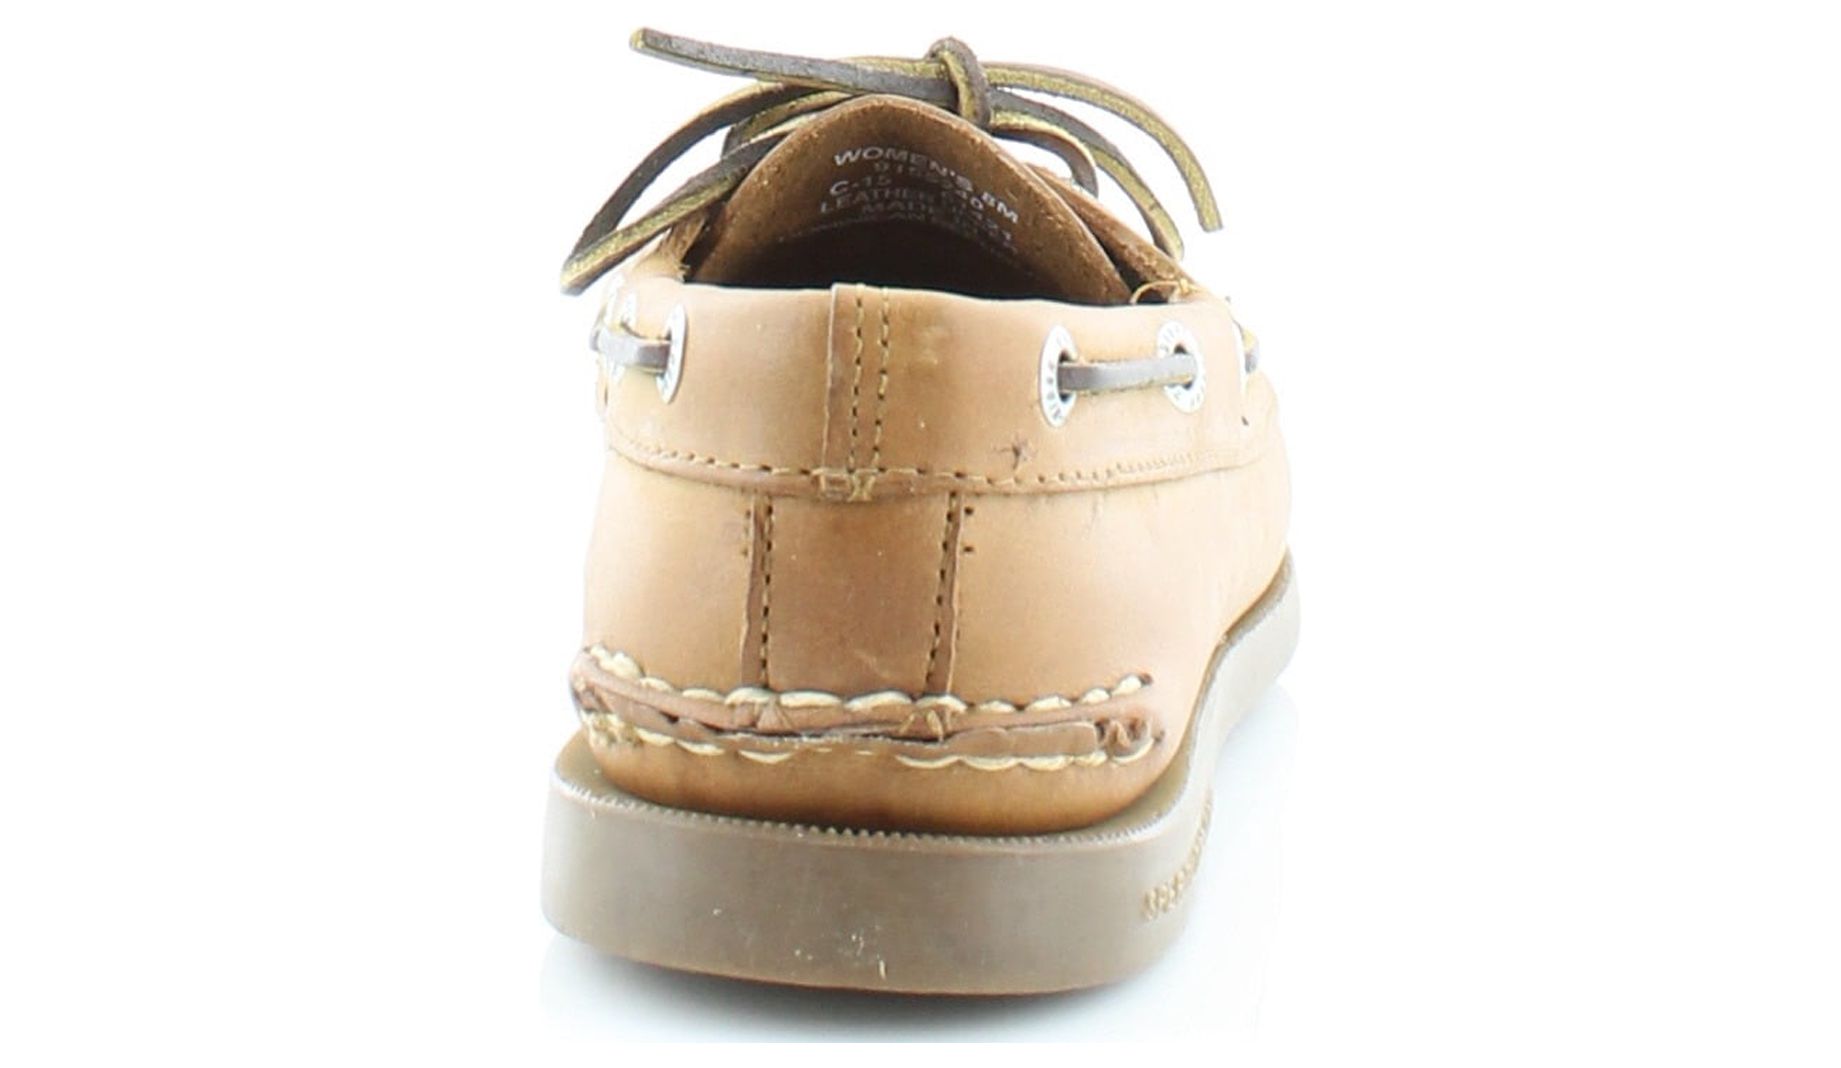 Sperry Top-Sider A/O 2-Eye Women's Loafers & Slip-Ons - image 5 of 5